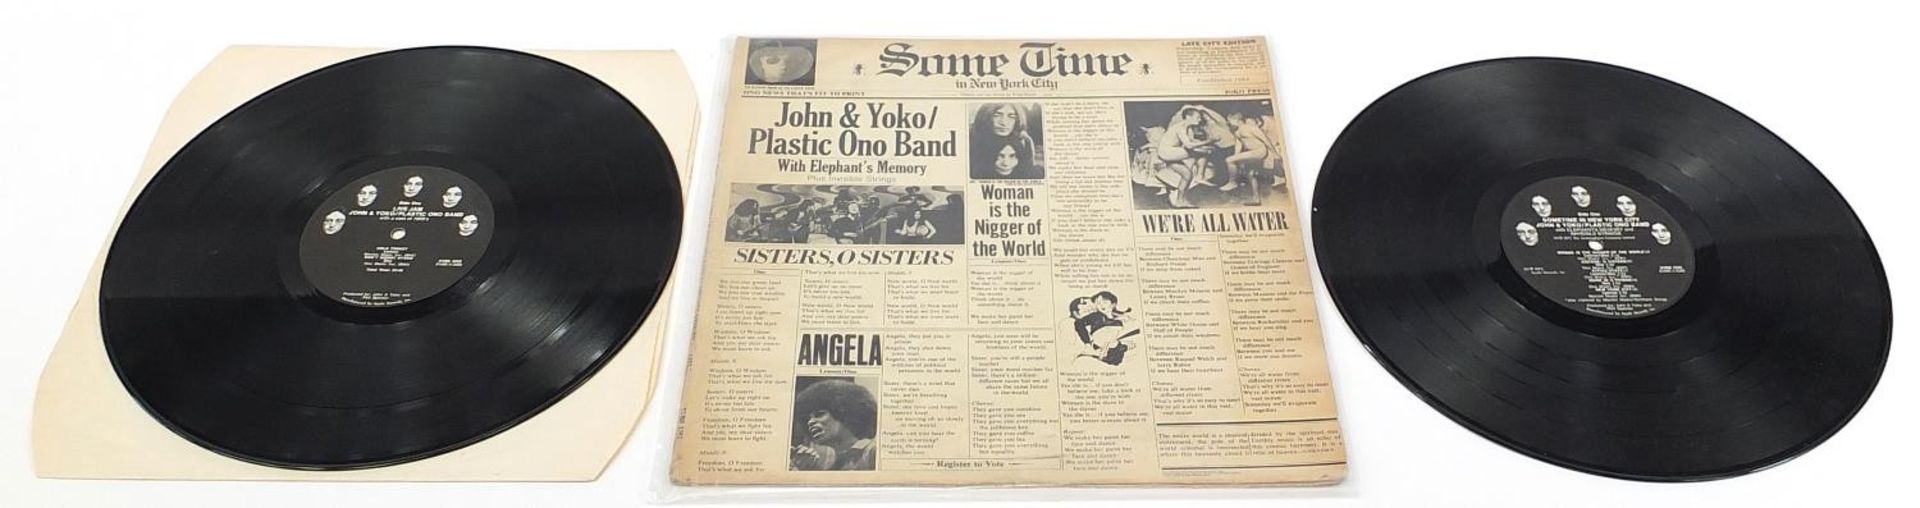 The Beatles, John Lennon & Yoko Ono vinyl LP records including Walls and Bridges with poster, - Image 4 of 41